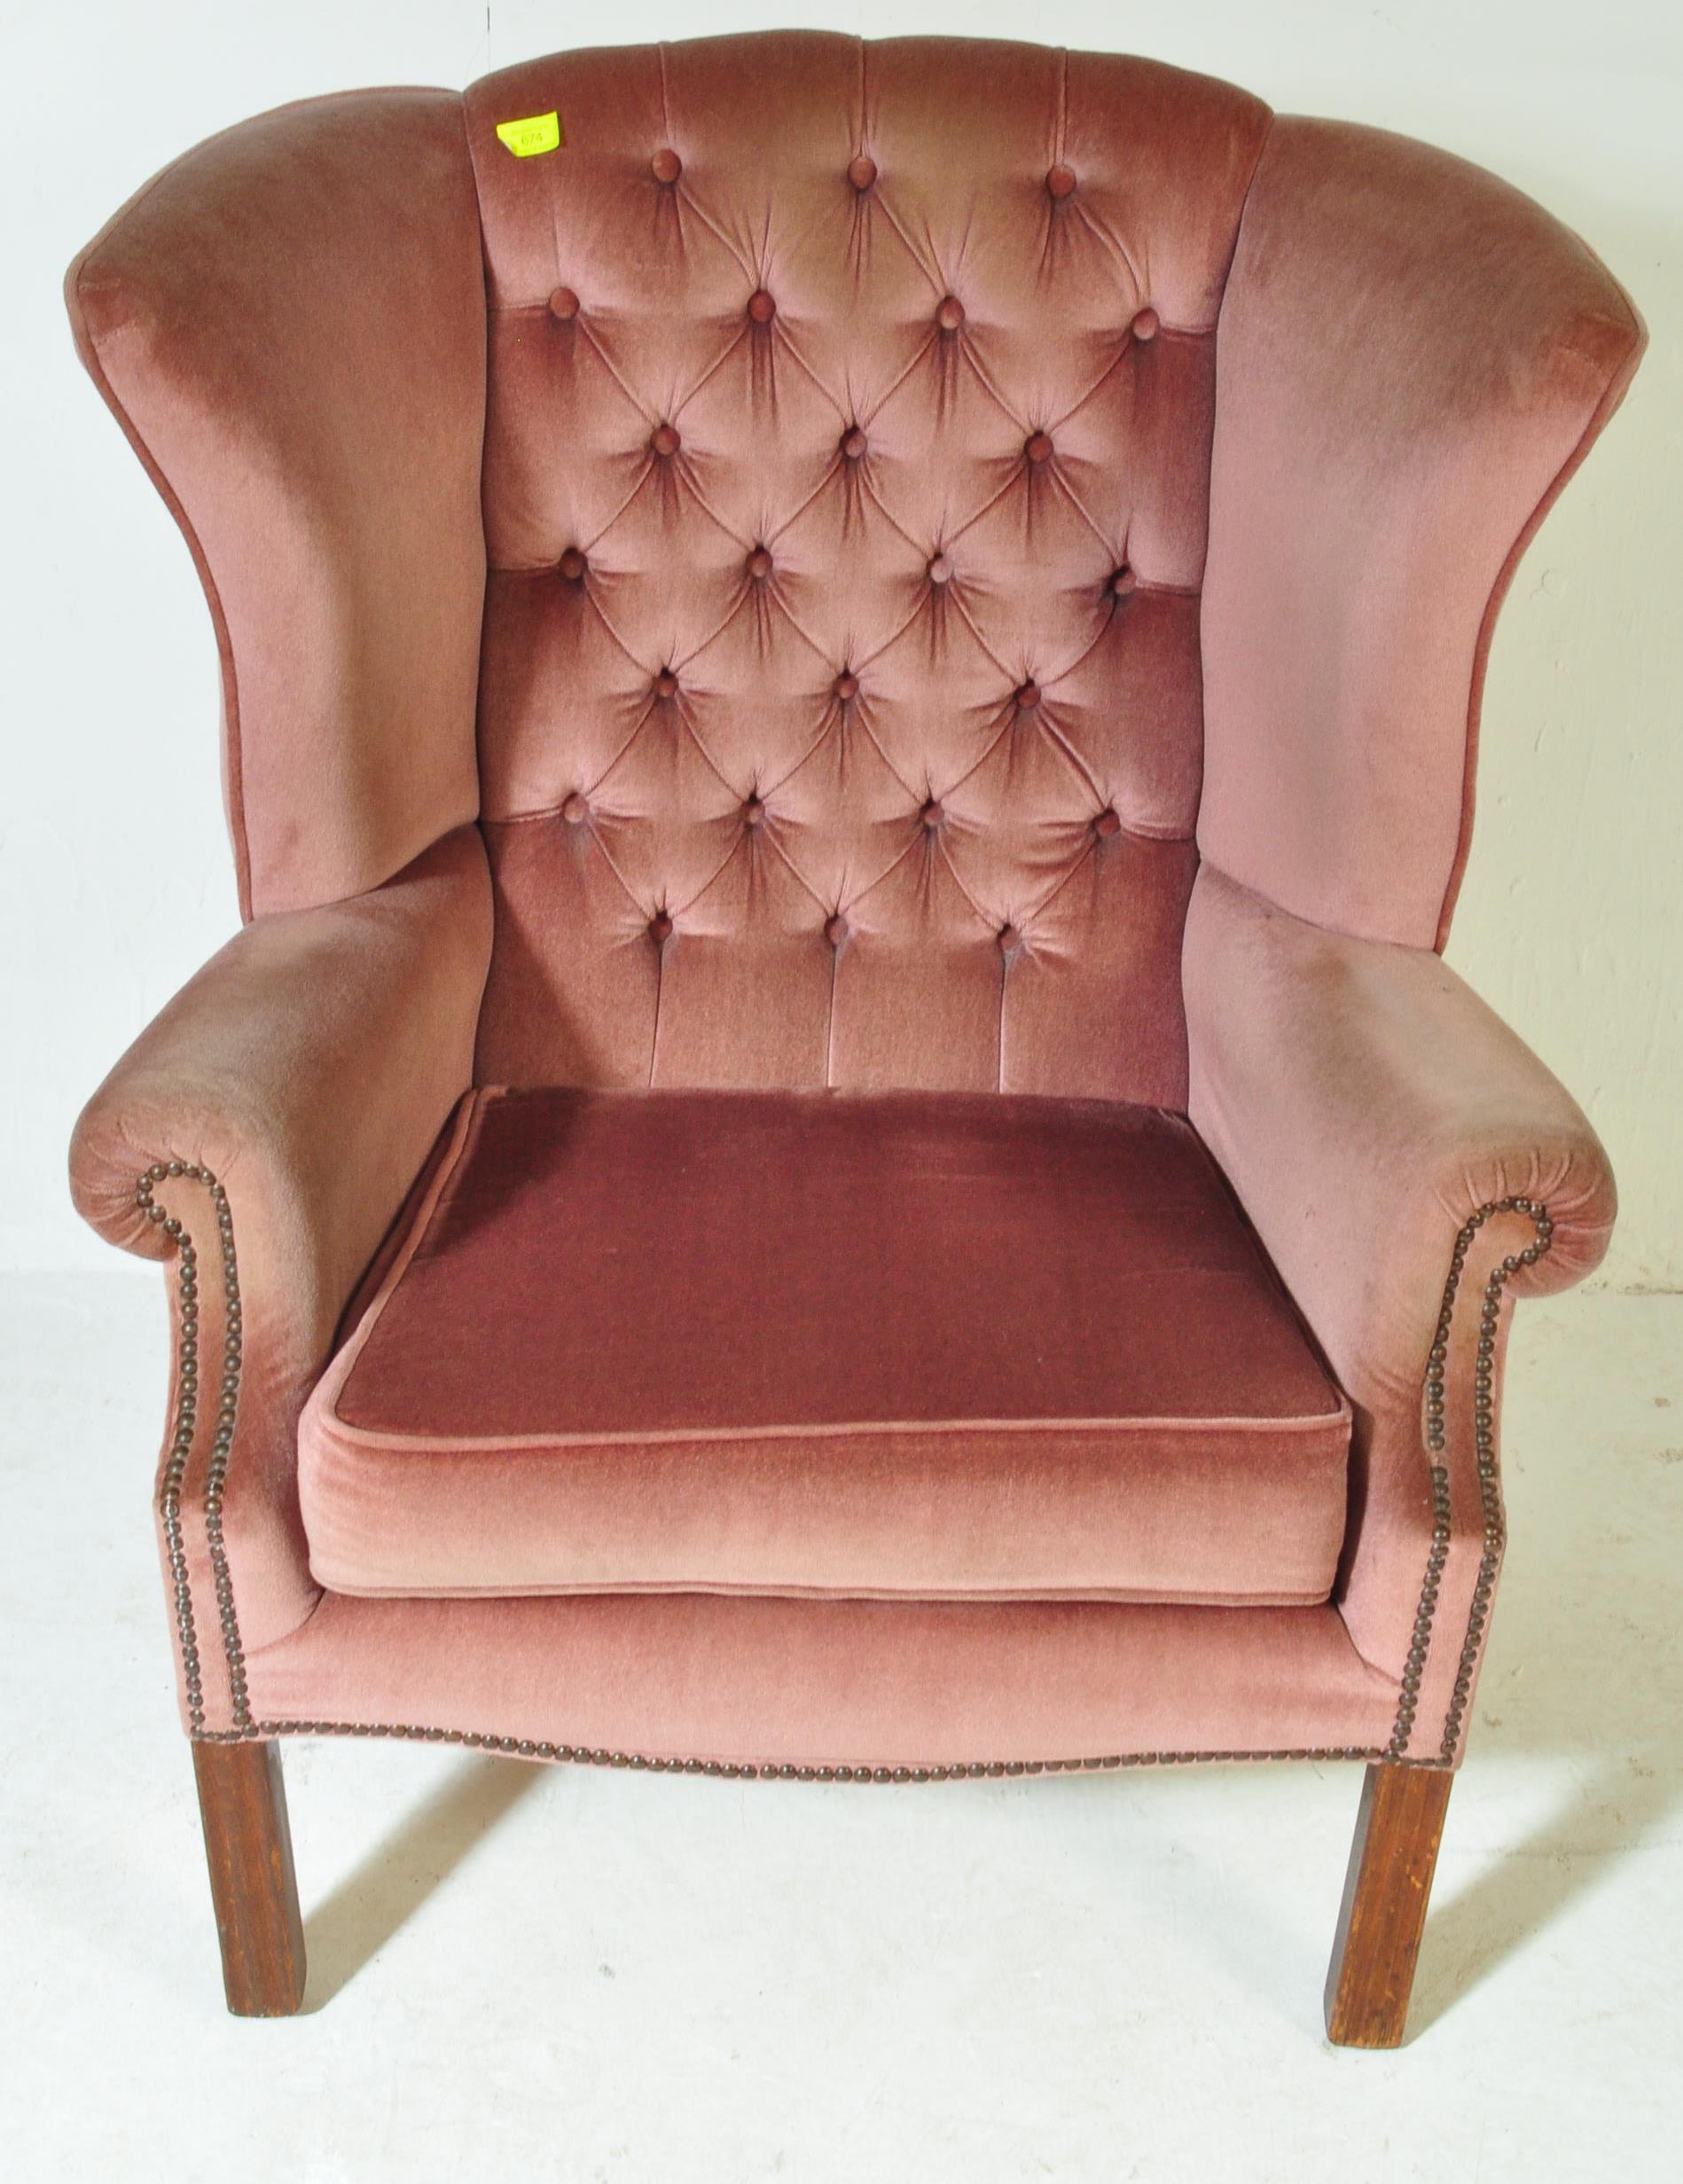 VINTAGE MID 20TH CENTURY PINK UPHOLSTERED WINGBACK ARMCHAIR - Image 4 of 5